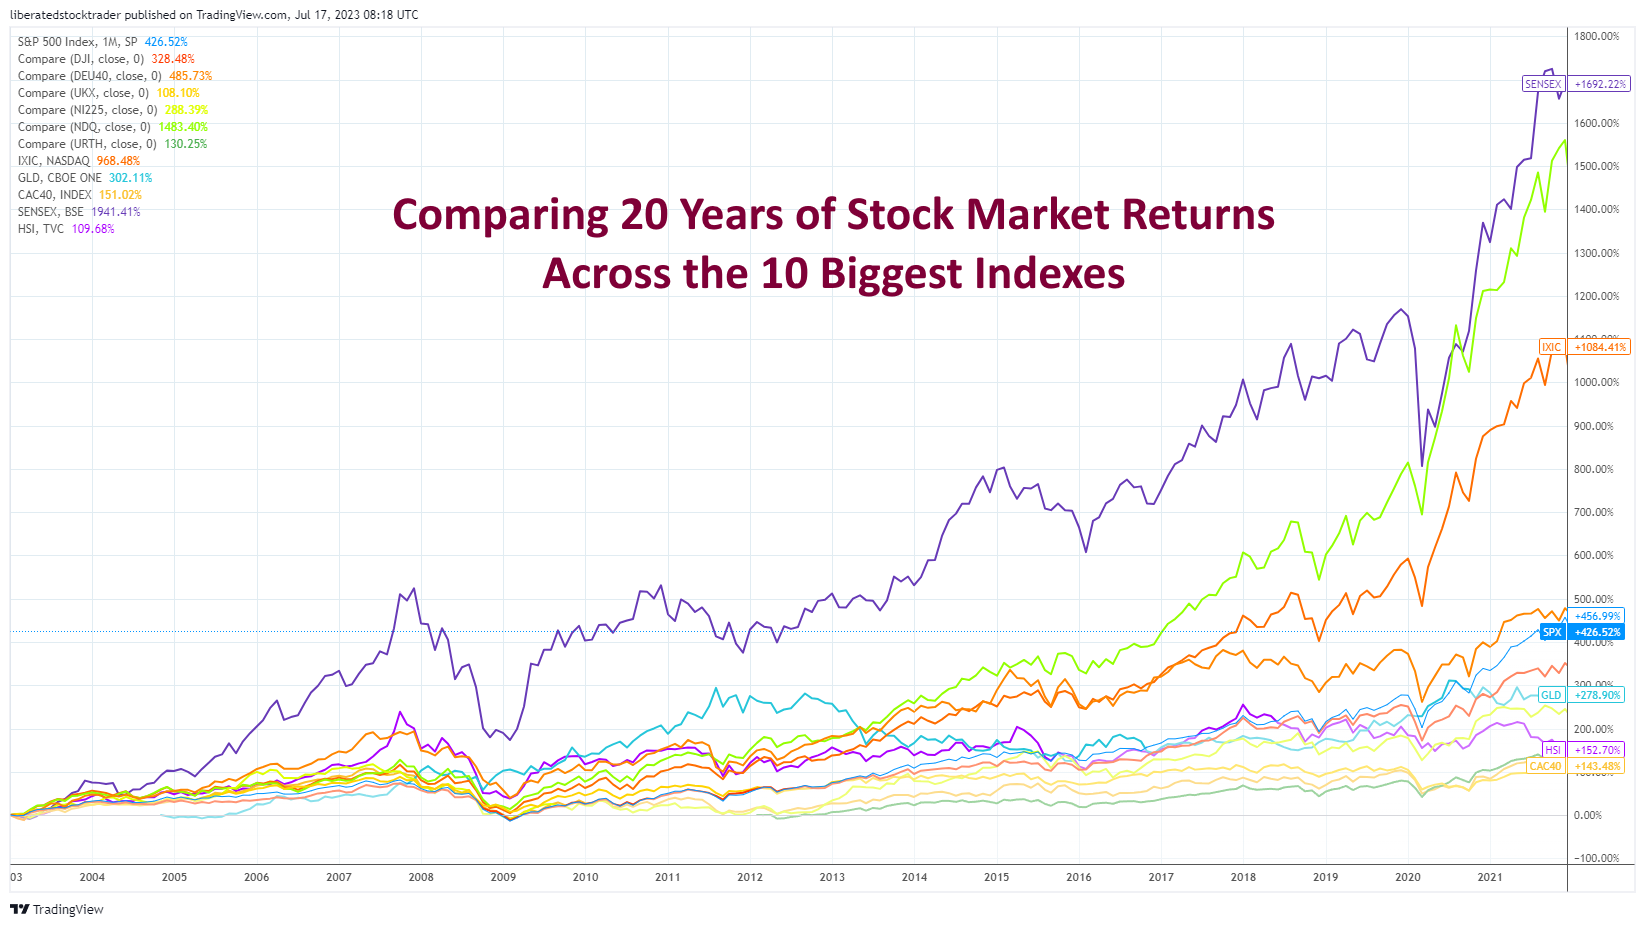 How to Compare Buy and Hold Returns Across the 10 Major Global Stock Market Indexes